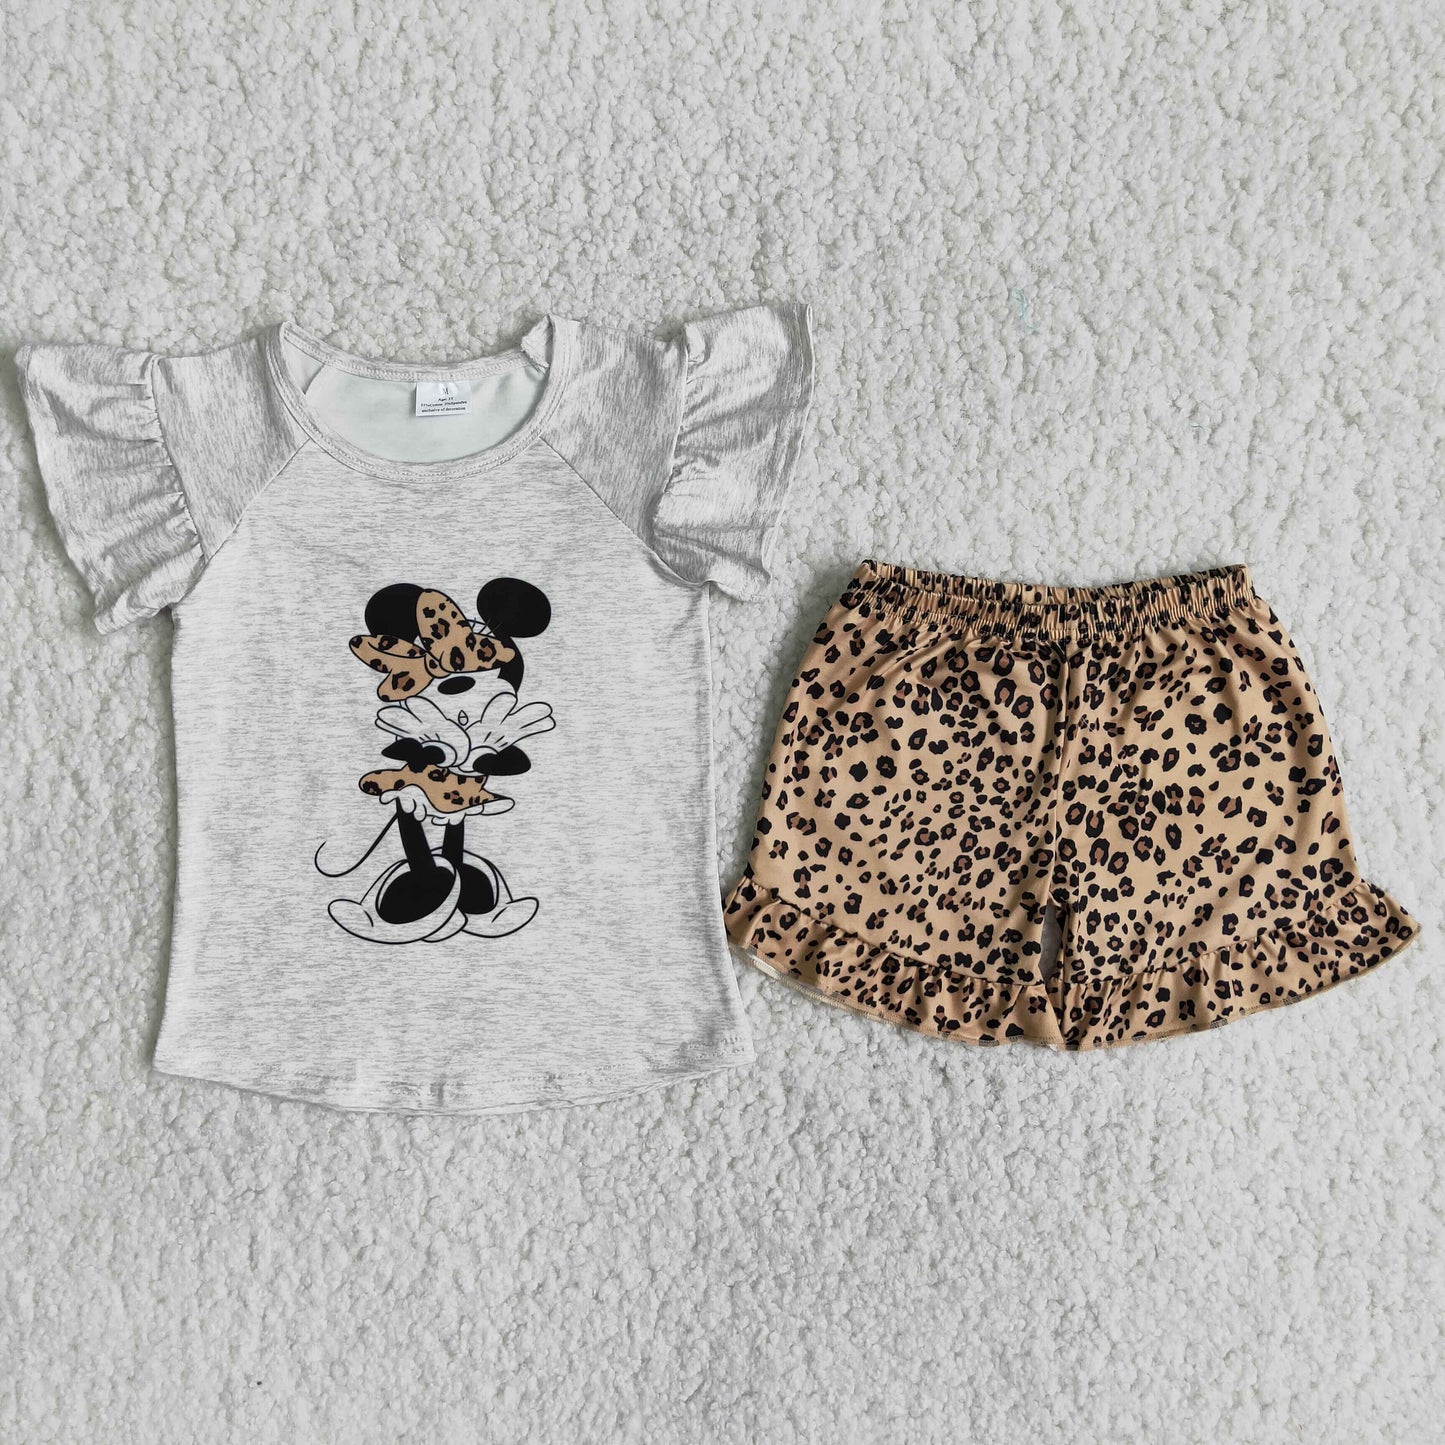 C0-14 Mickey Mouse off-white lace short-sleeved pants